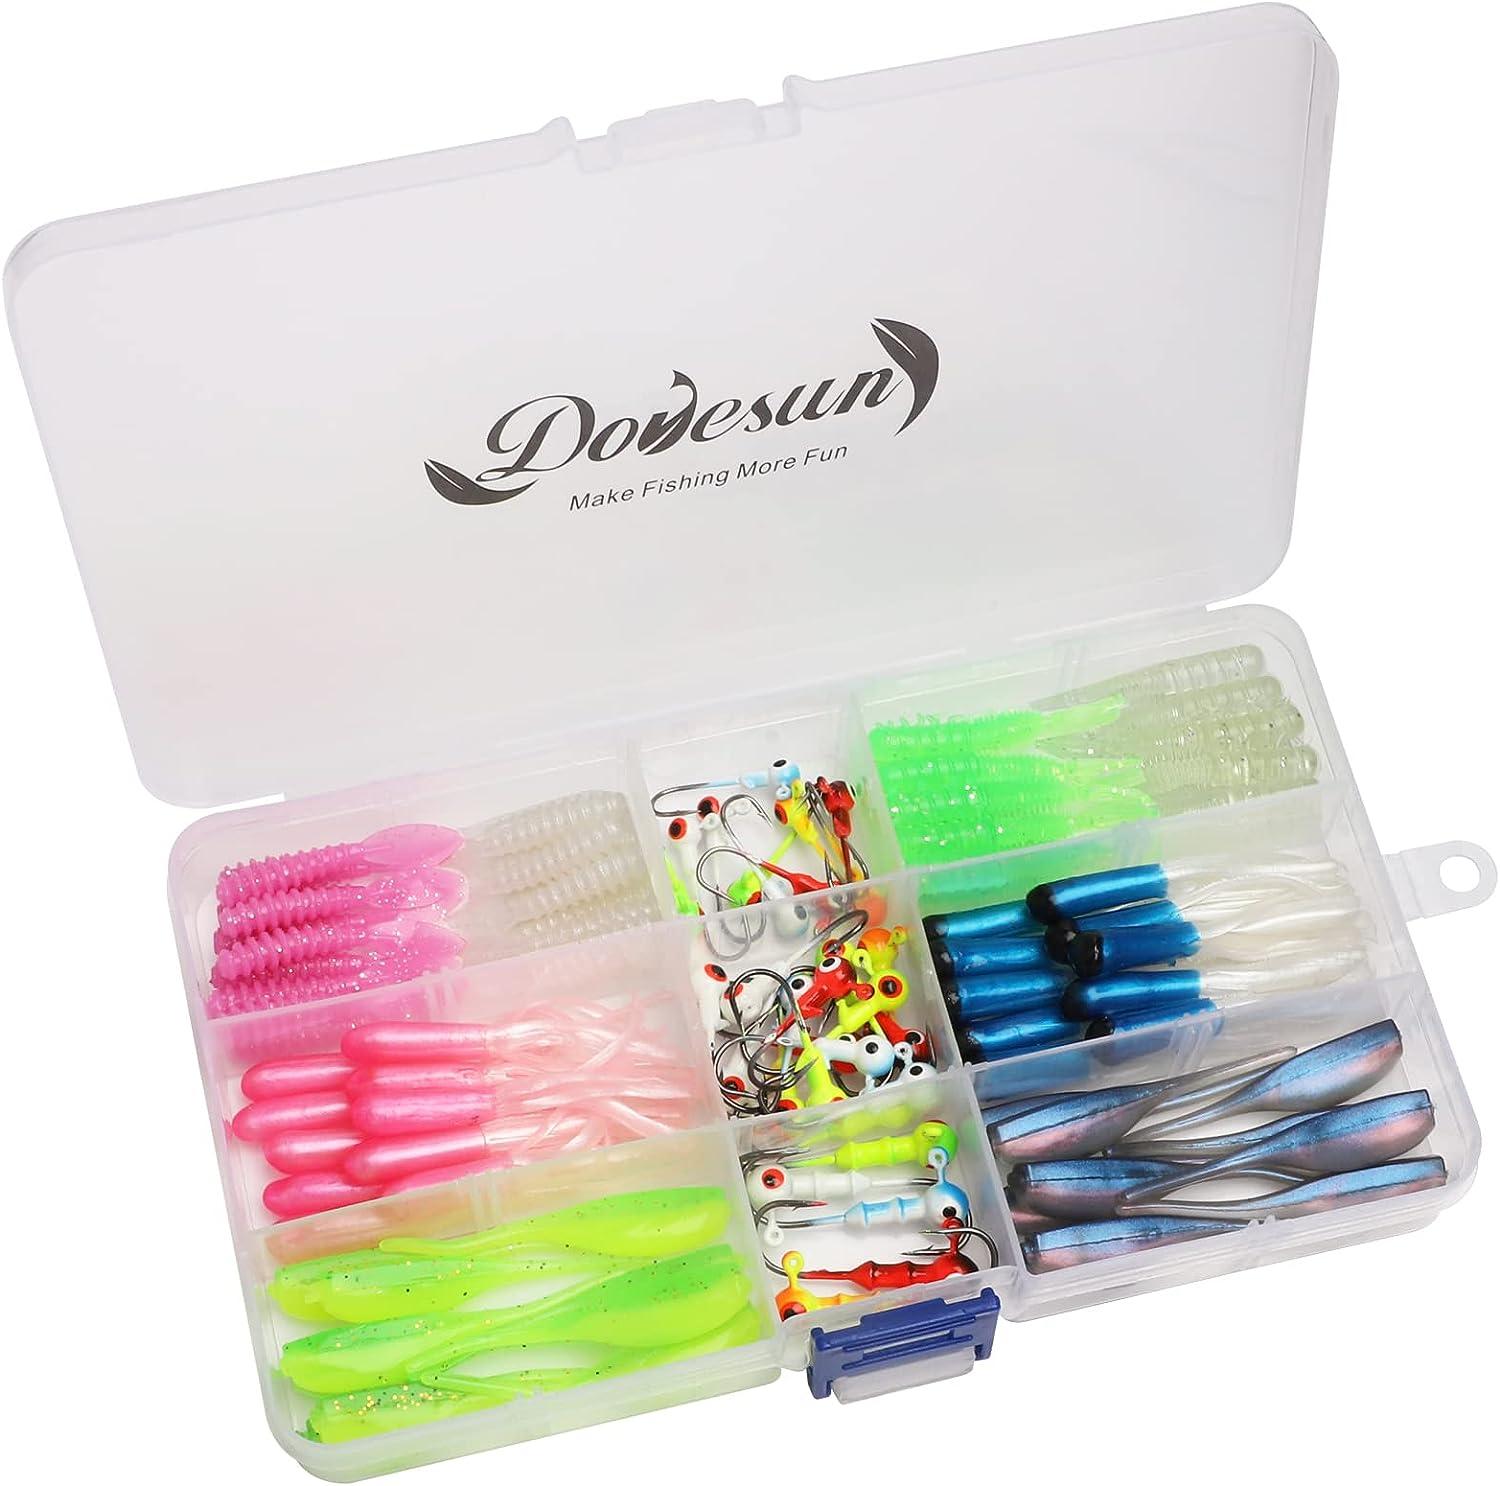 Dovesun 15pcs Jig Head Soft Plastic Fishing Lures Kit, Paddle Tail  Swimbaits 3 Types Lures for Trout | Bass Fishing